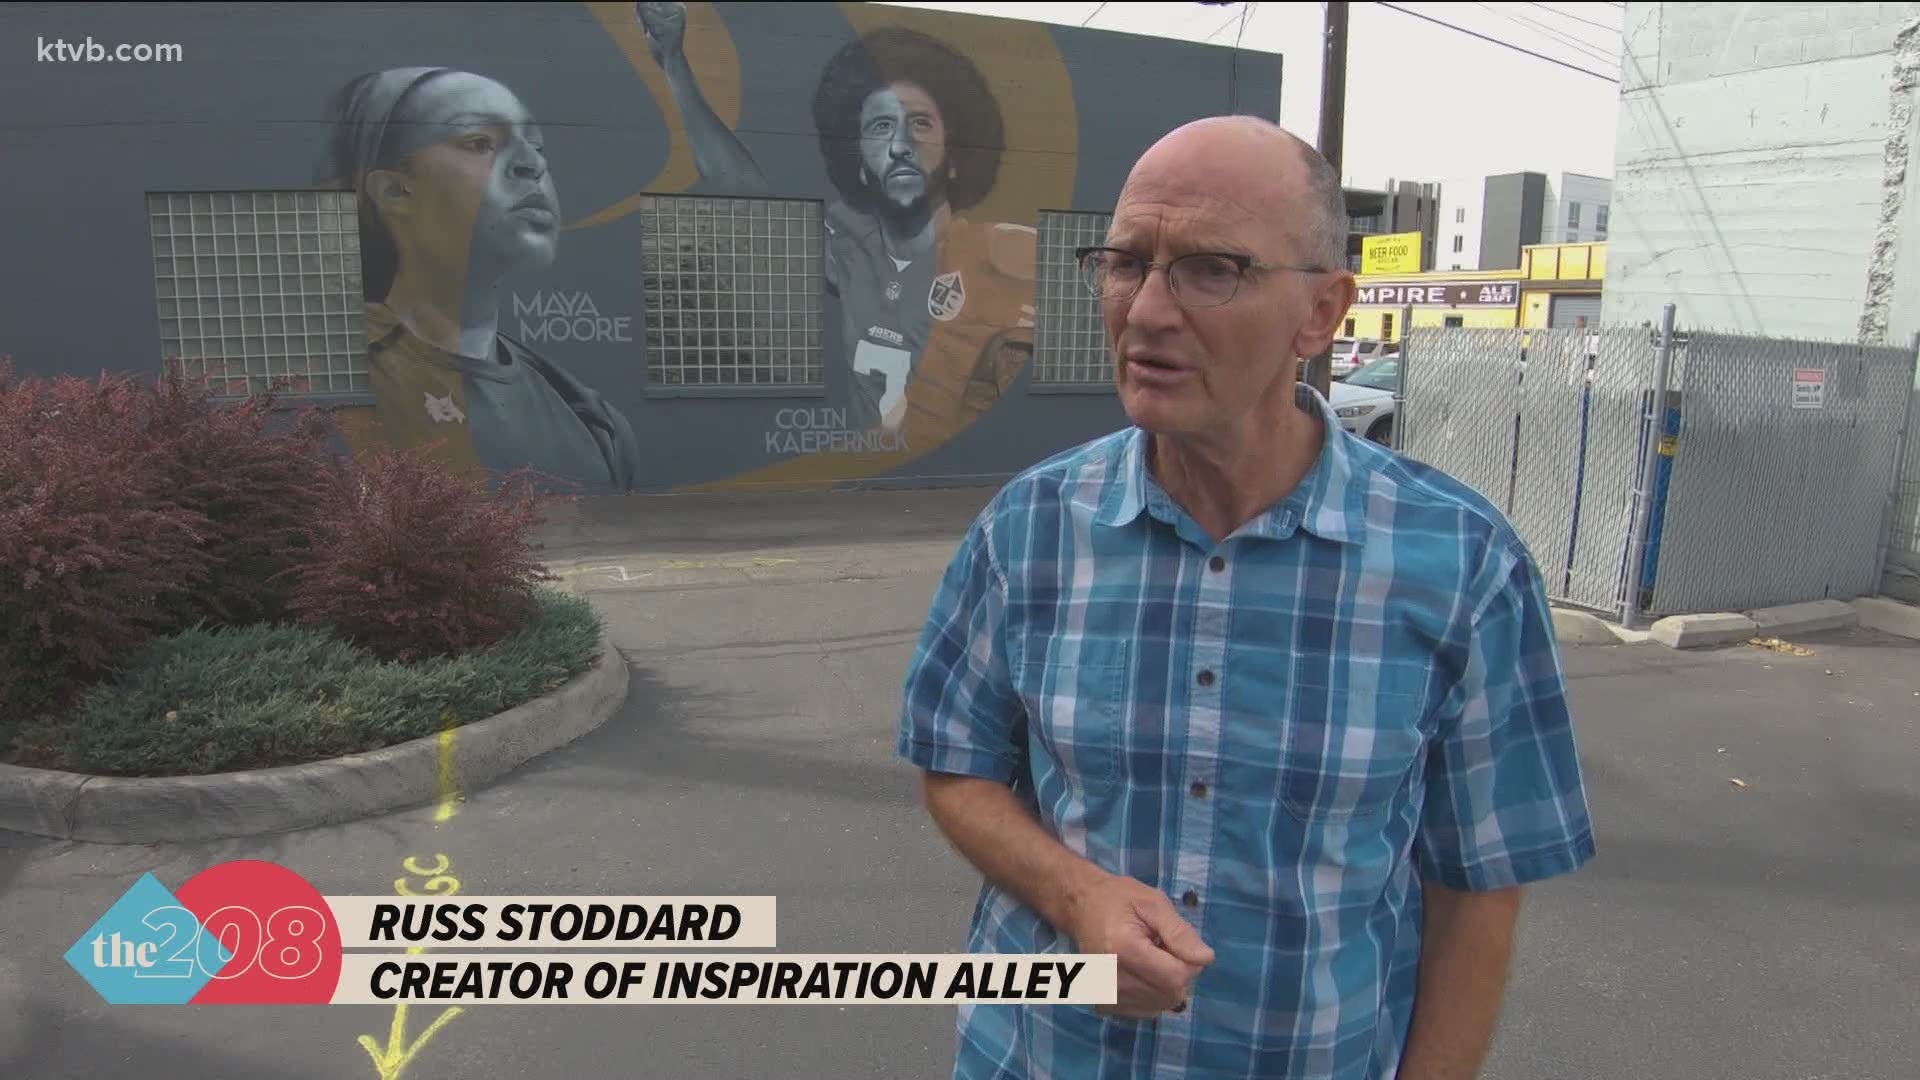 Russ Stoddard wanted to create an 'Inspiration Alley' to highlight those that have inspired others.